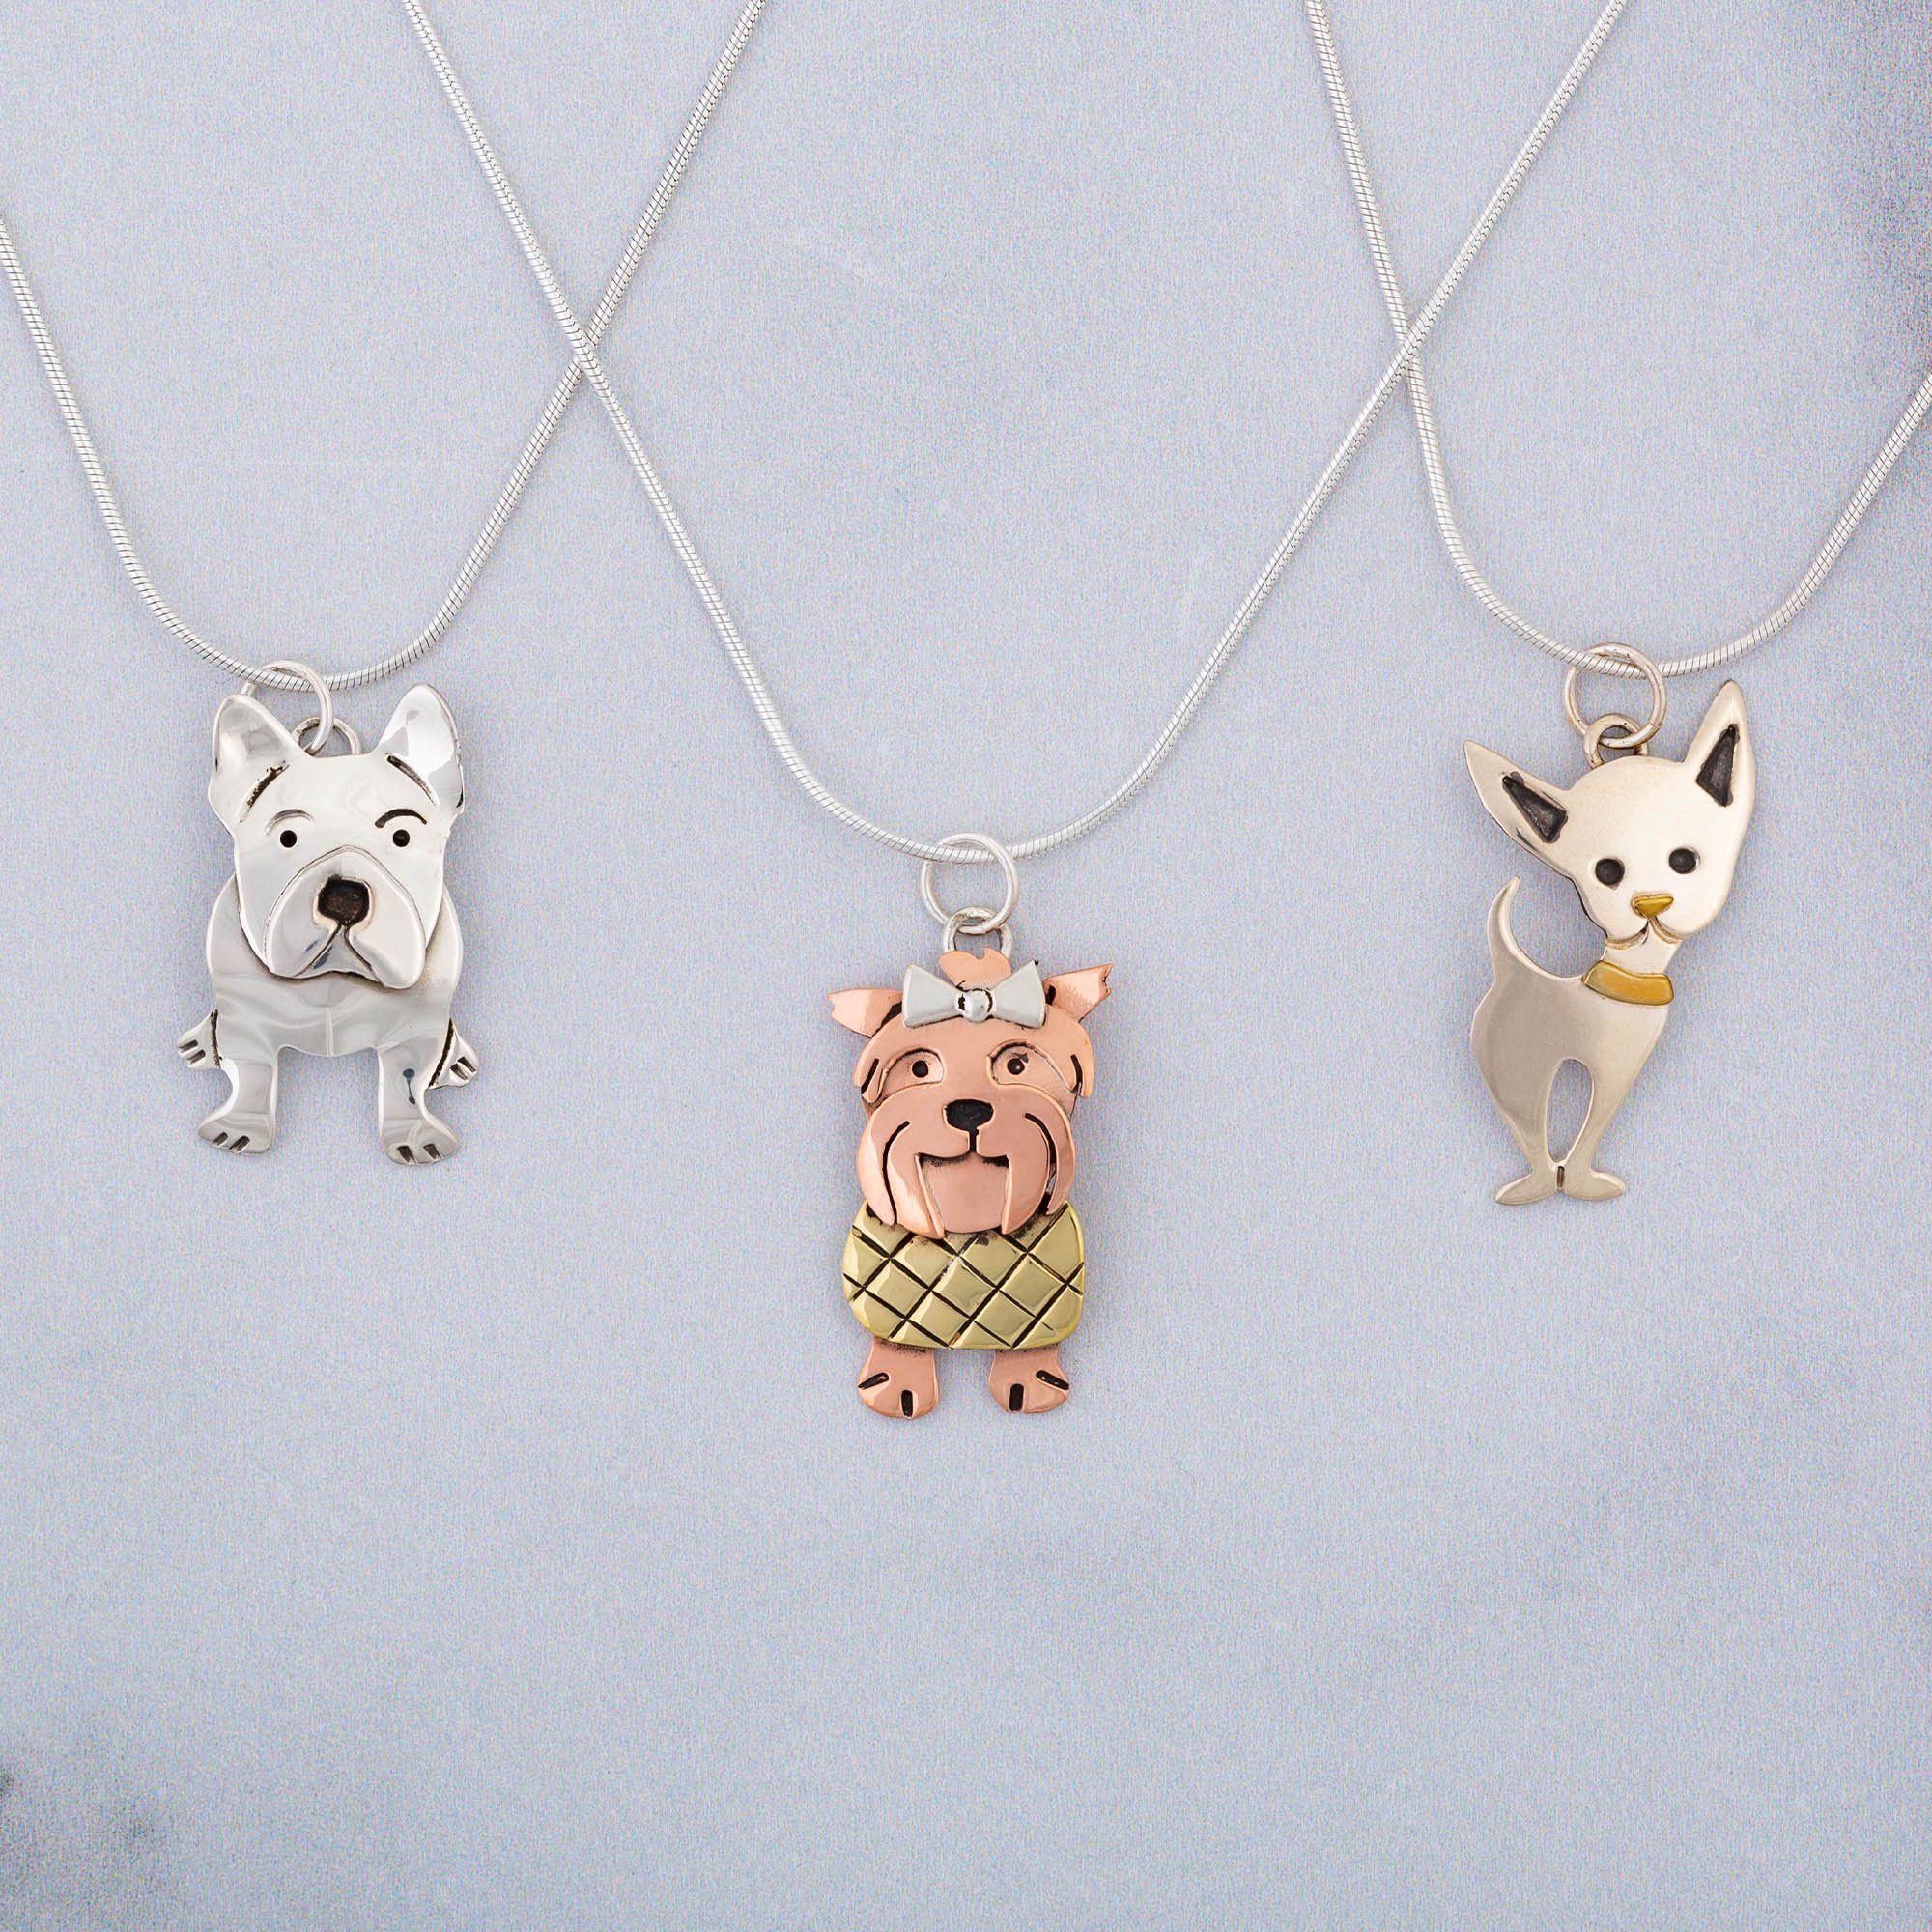 Darling Dog Mixed Metal Necklace - Chihuahua - Pendant Only